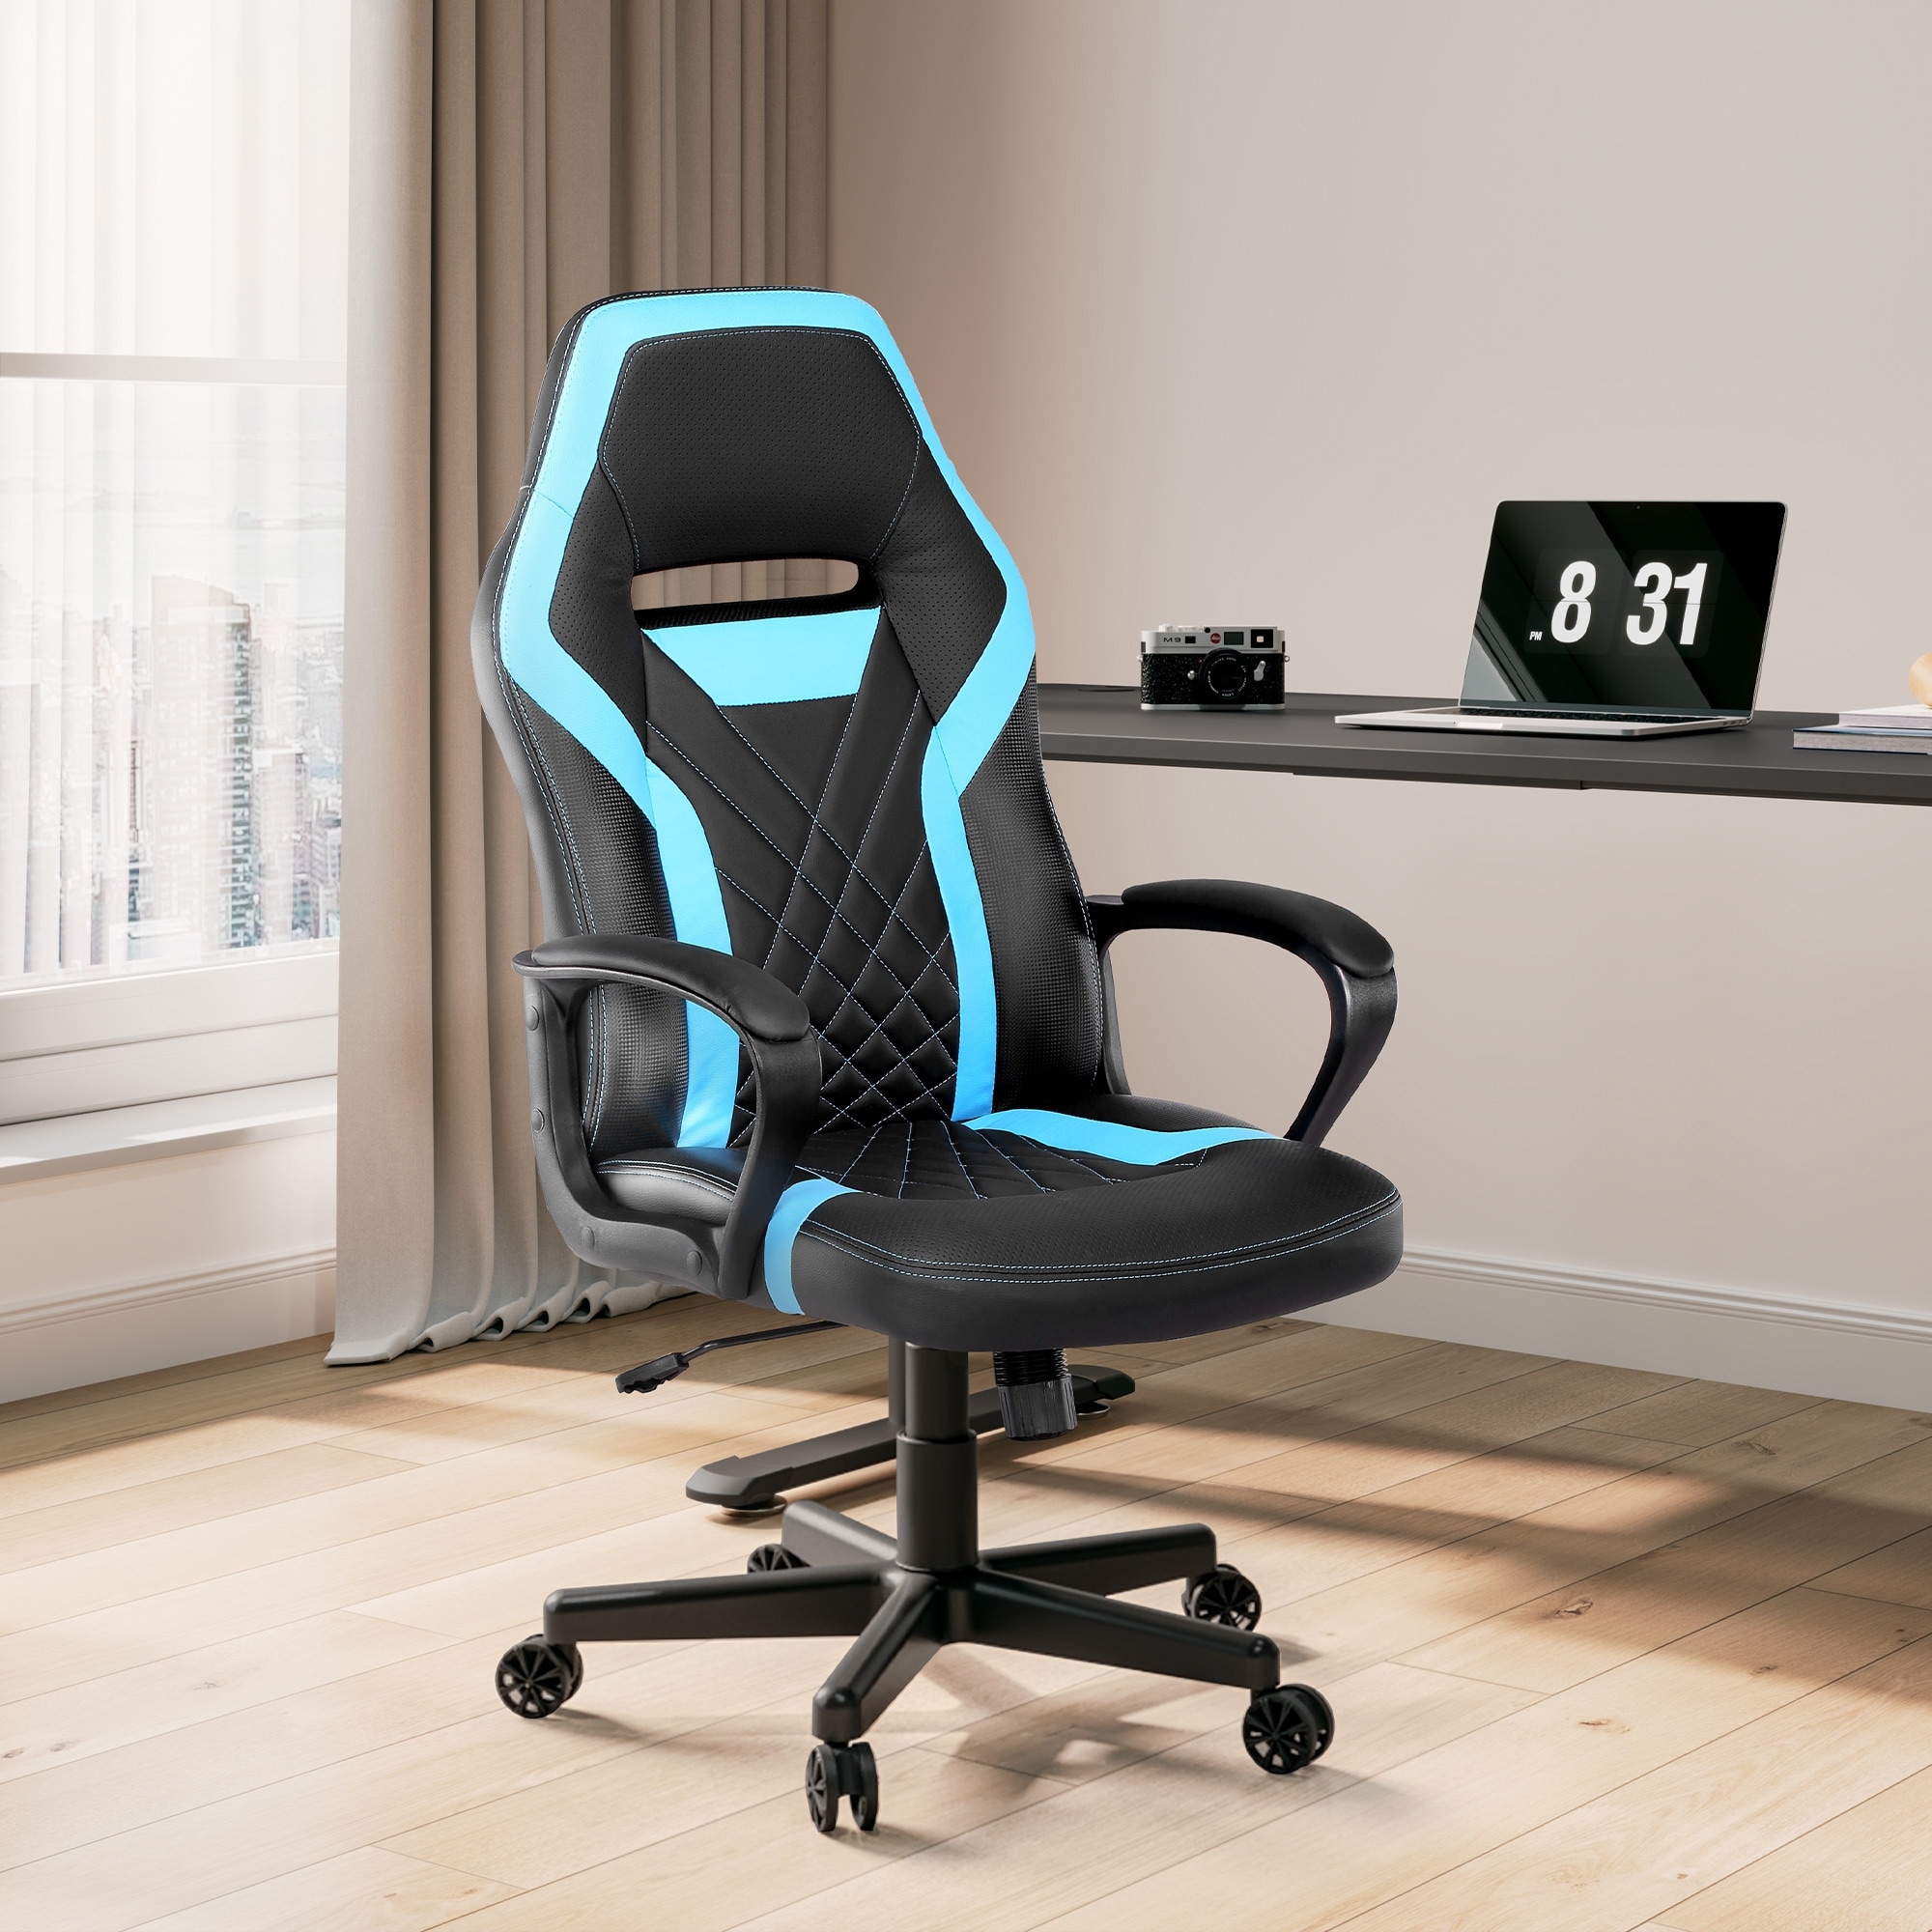 https://ak1.ostkcdn.com/images/products/is/images/direct/f4afdd16745aef834f8172072081a573da1a103d/Eureka-Ergonomic-PU-Leather-Gaming-Chair-Home-Office-Computer-Chair-with-Hearest%2C-Lumbar-Support.jpg